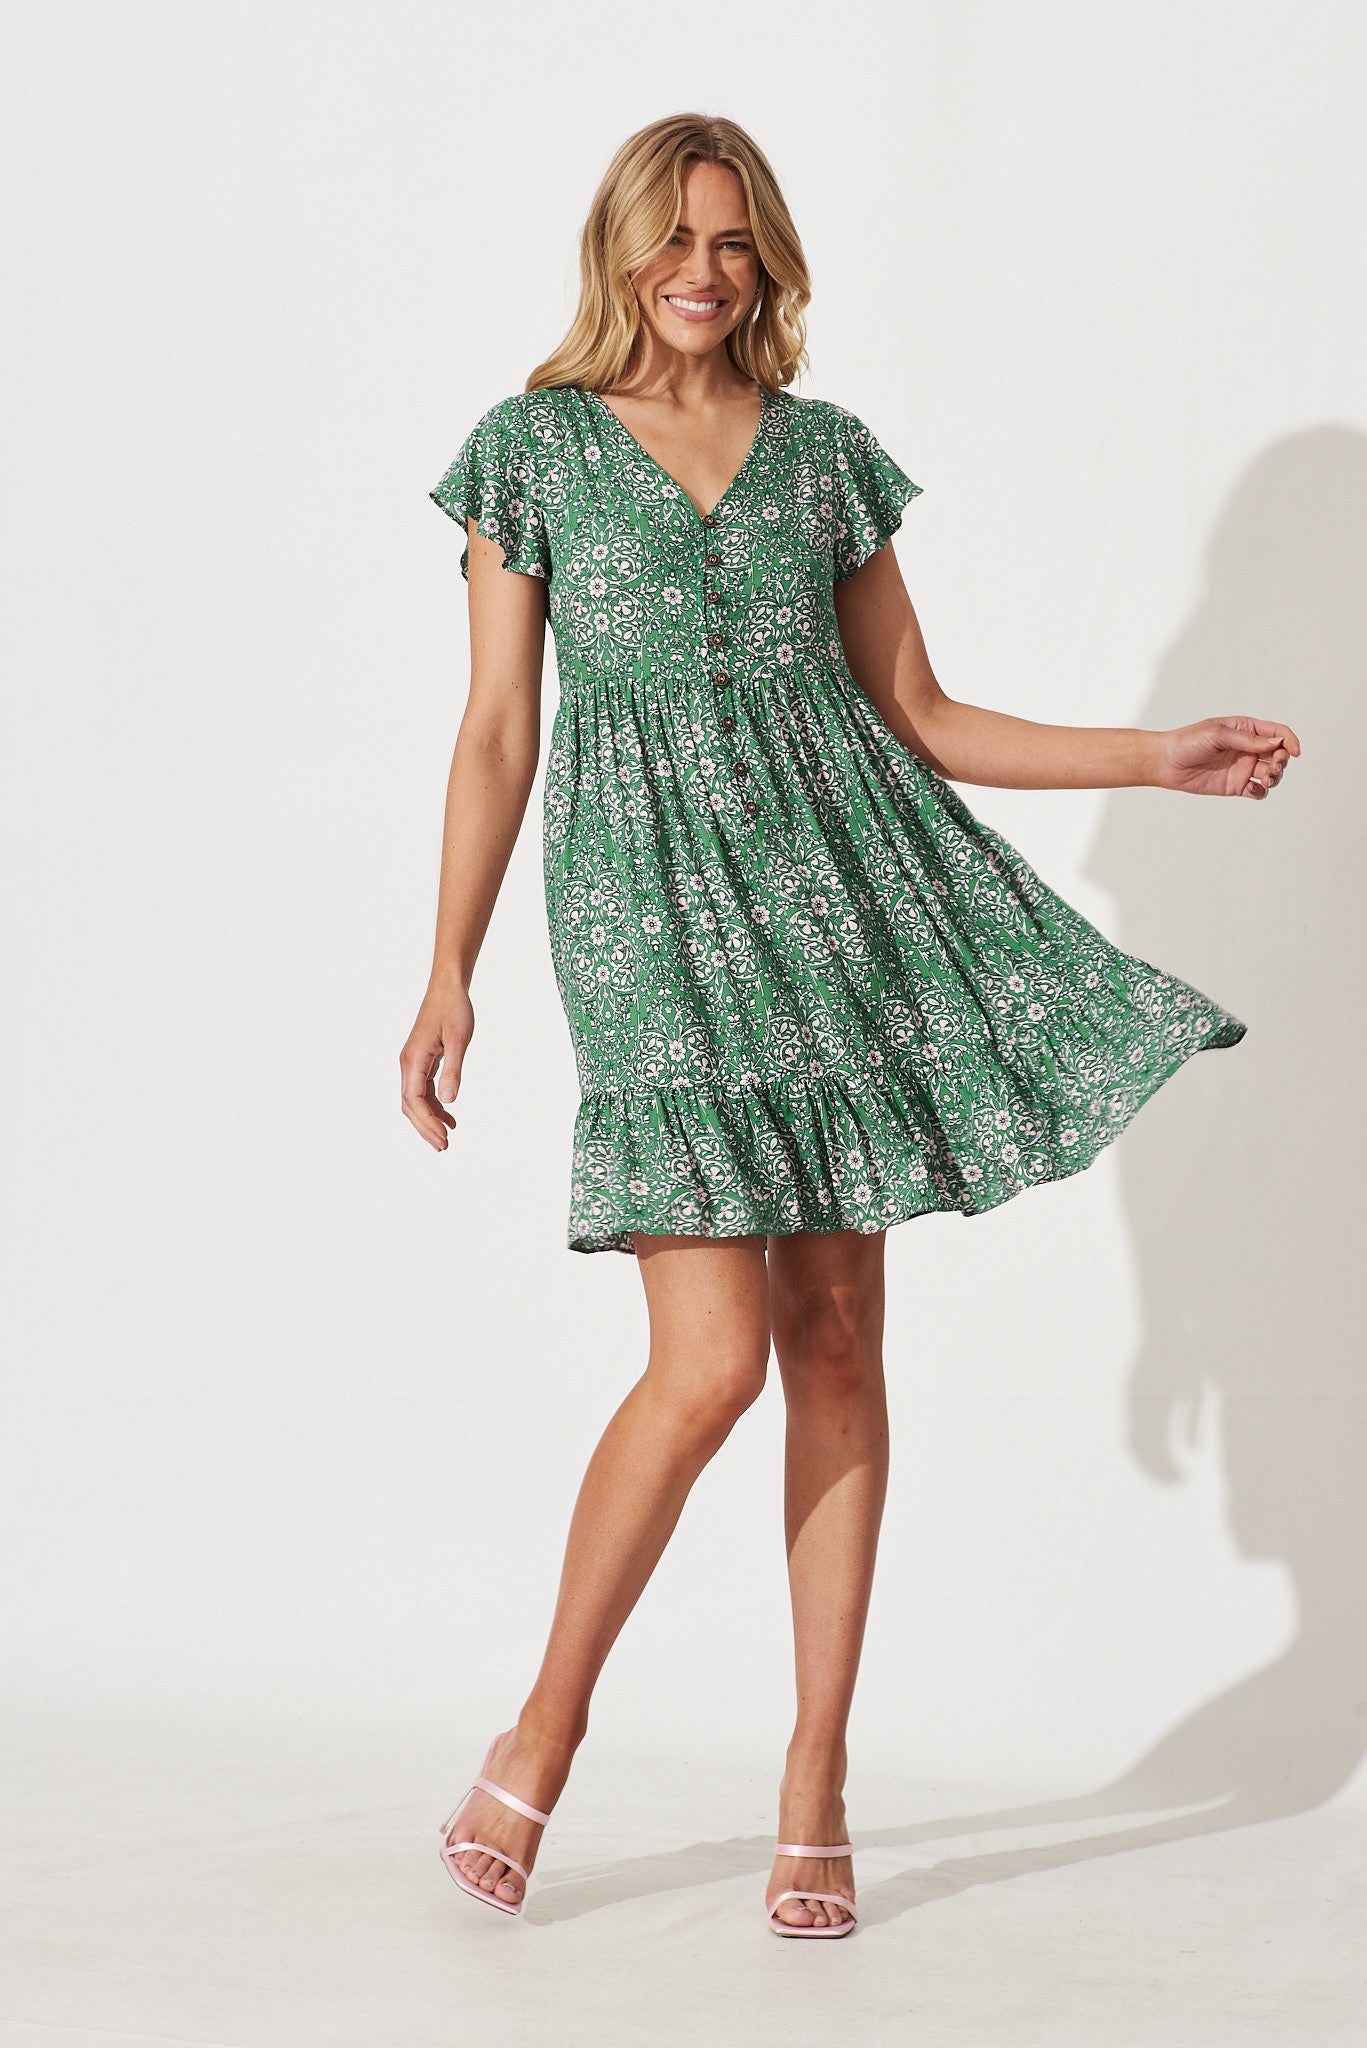 Yarraville Dress In Green With Cream Floral Print - full length